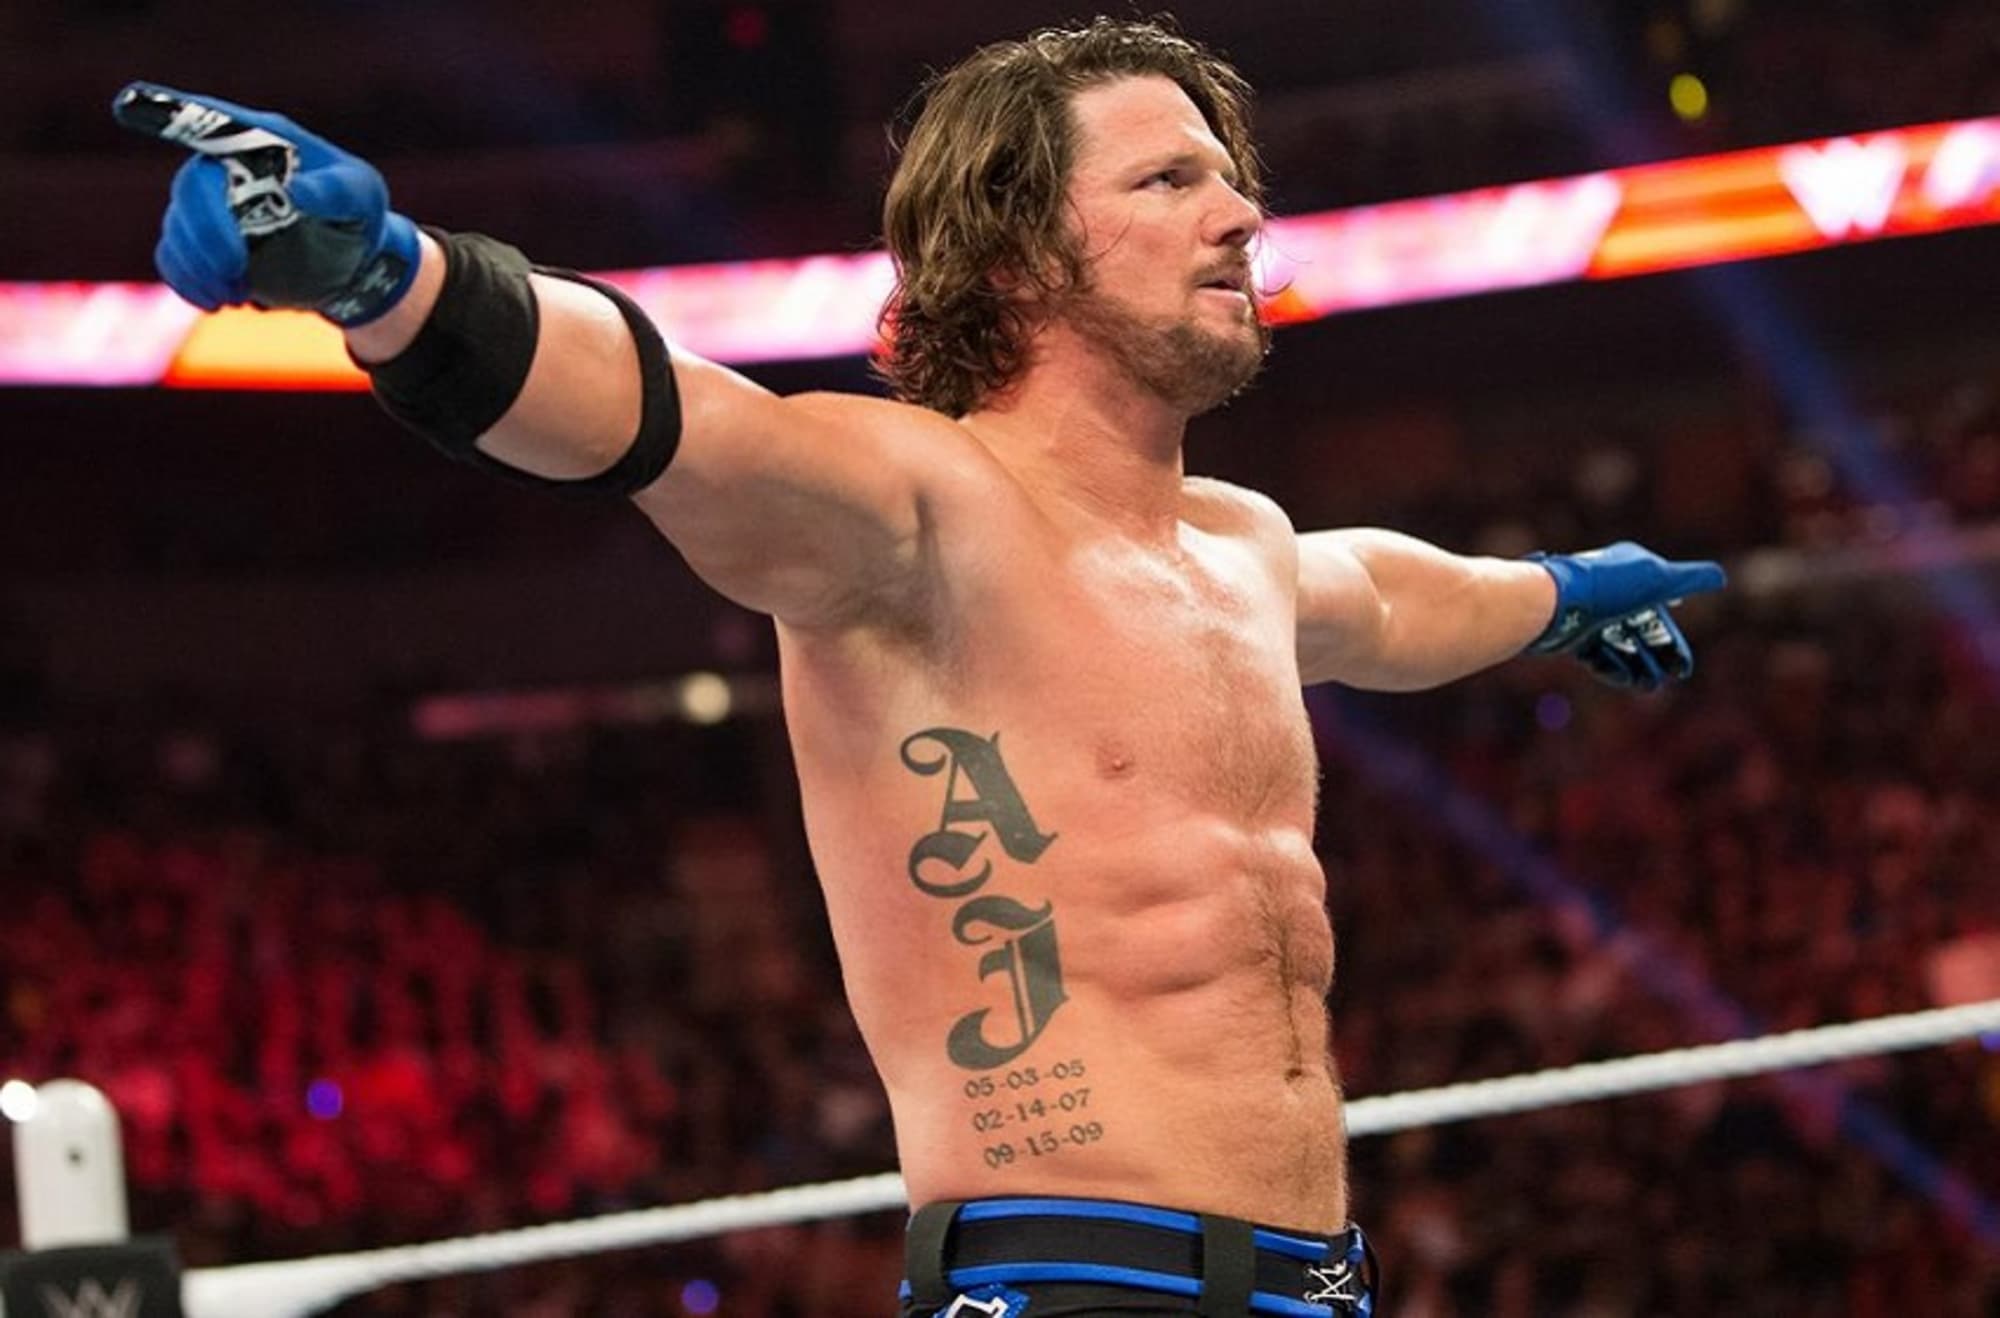 AJ Styles Had The Greatest Royal Rumble Debut Of All Time